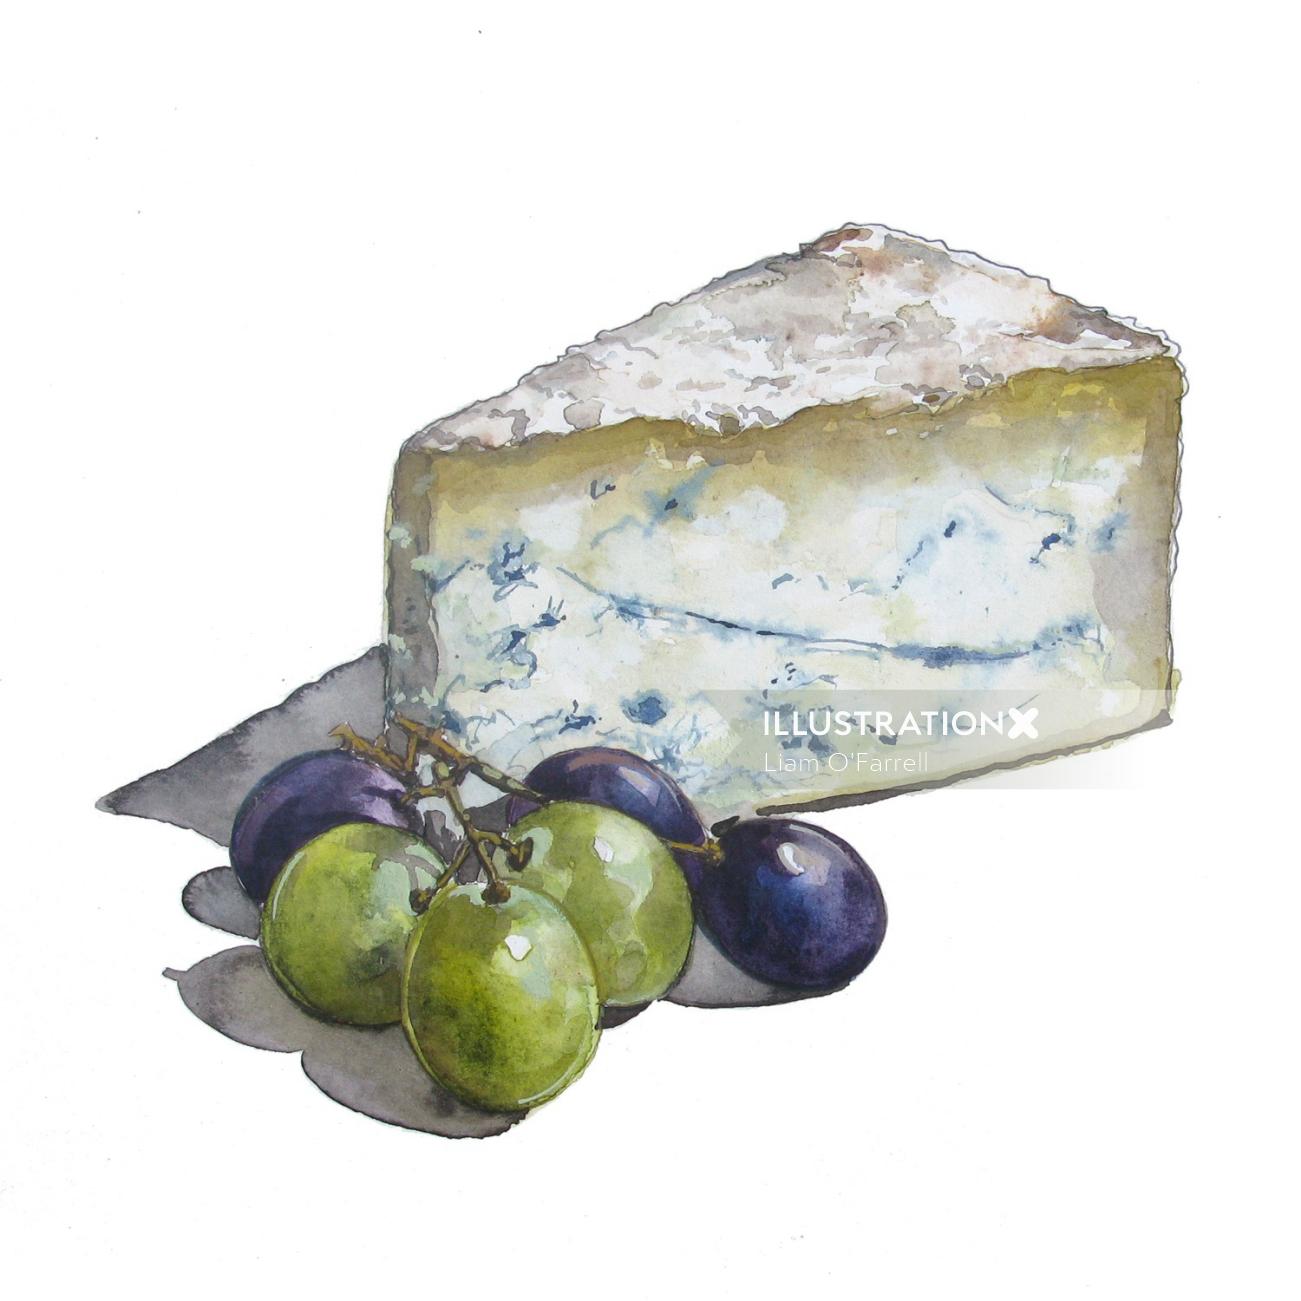 Watercolour of cheese and grapes